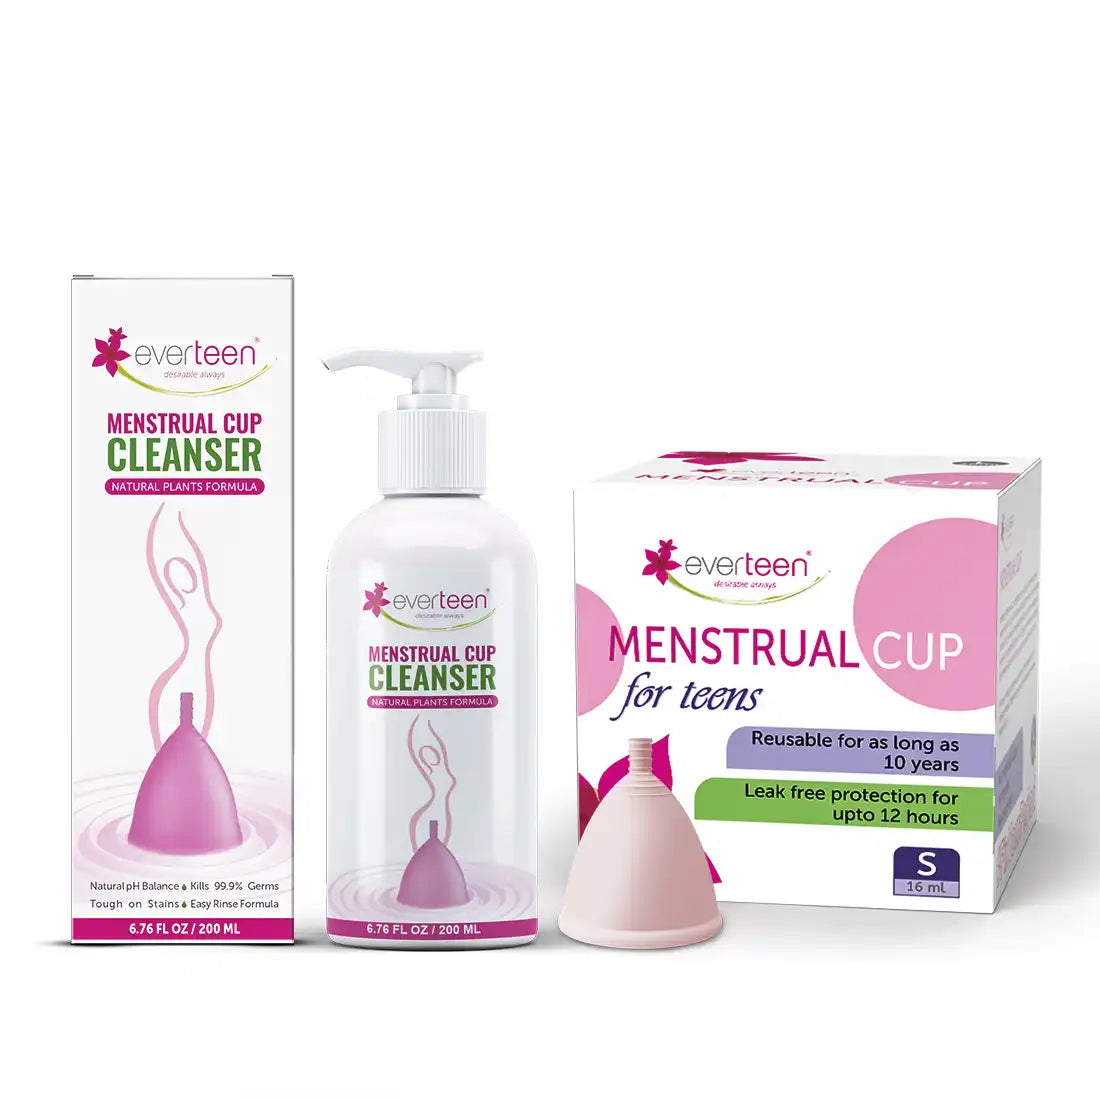 everteen Combo - Menstrual Cup and Menstrual Cup Cleanser for Periods in Women - everteen